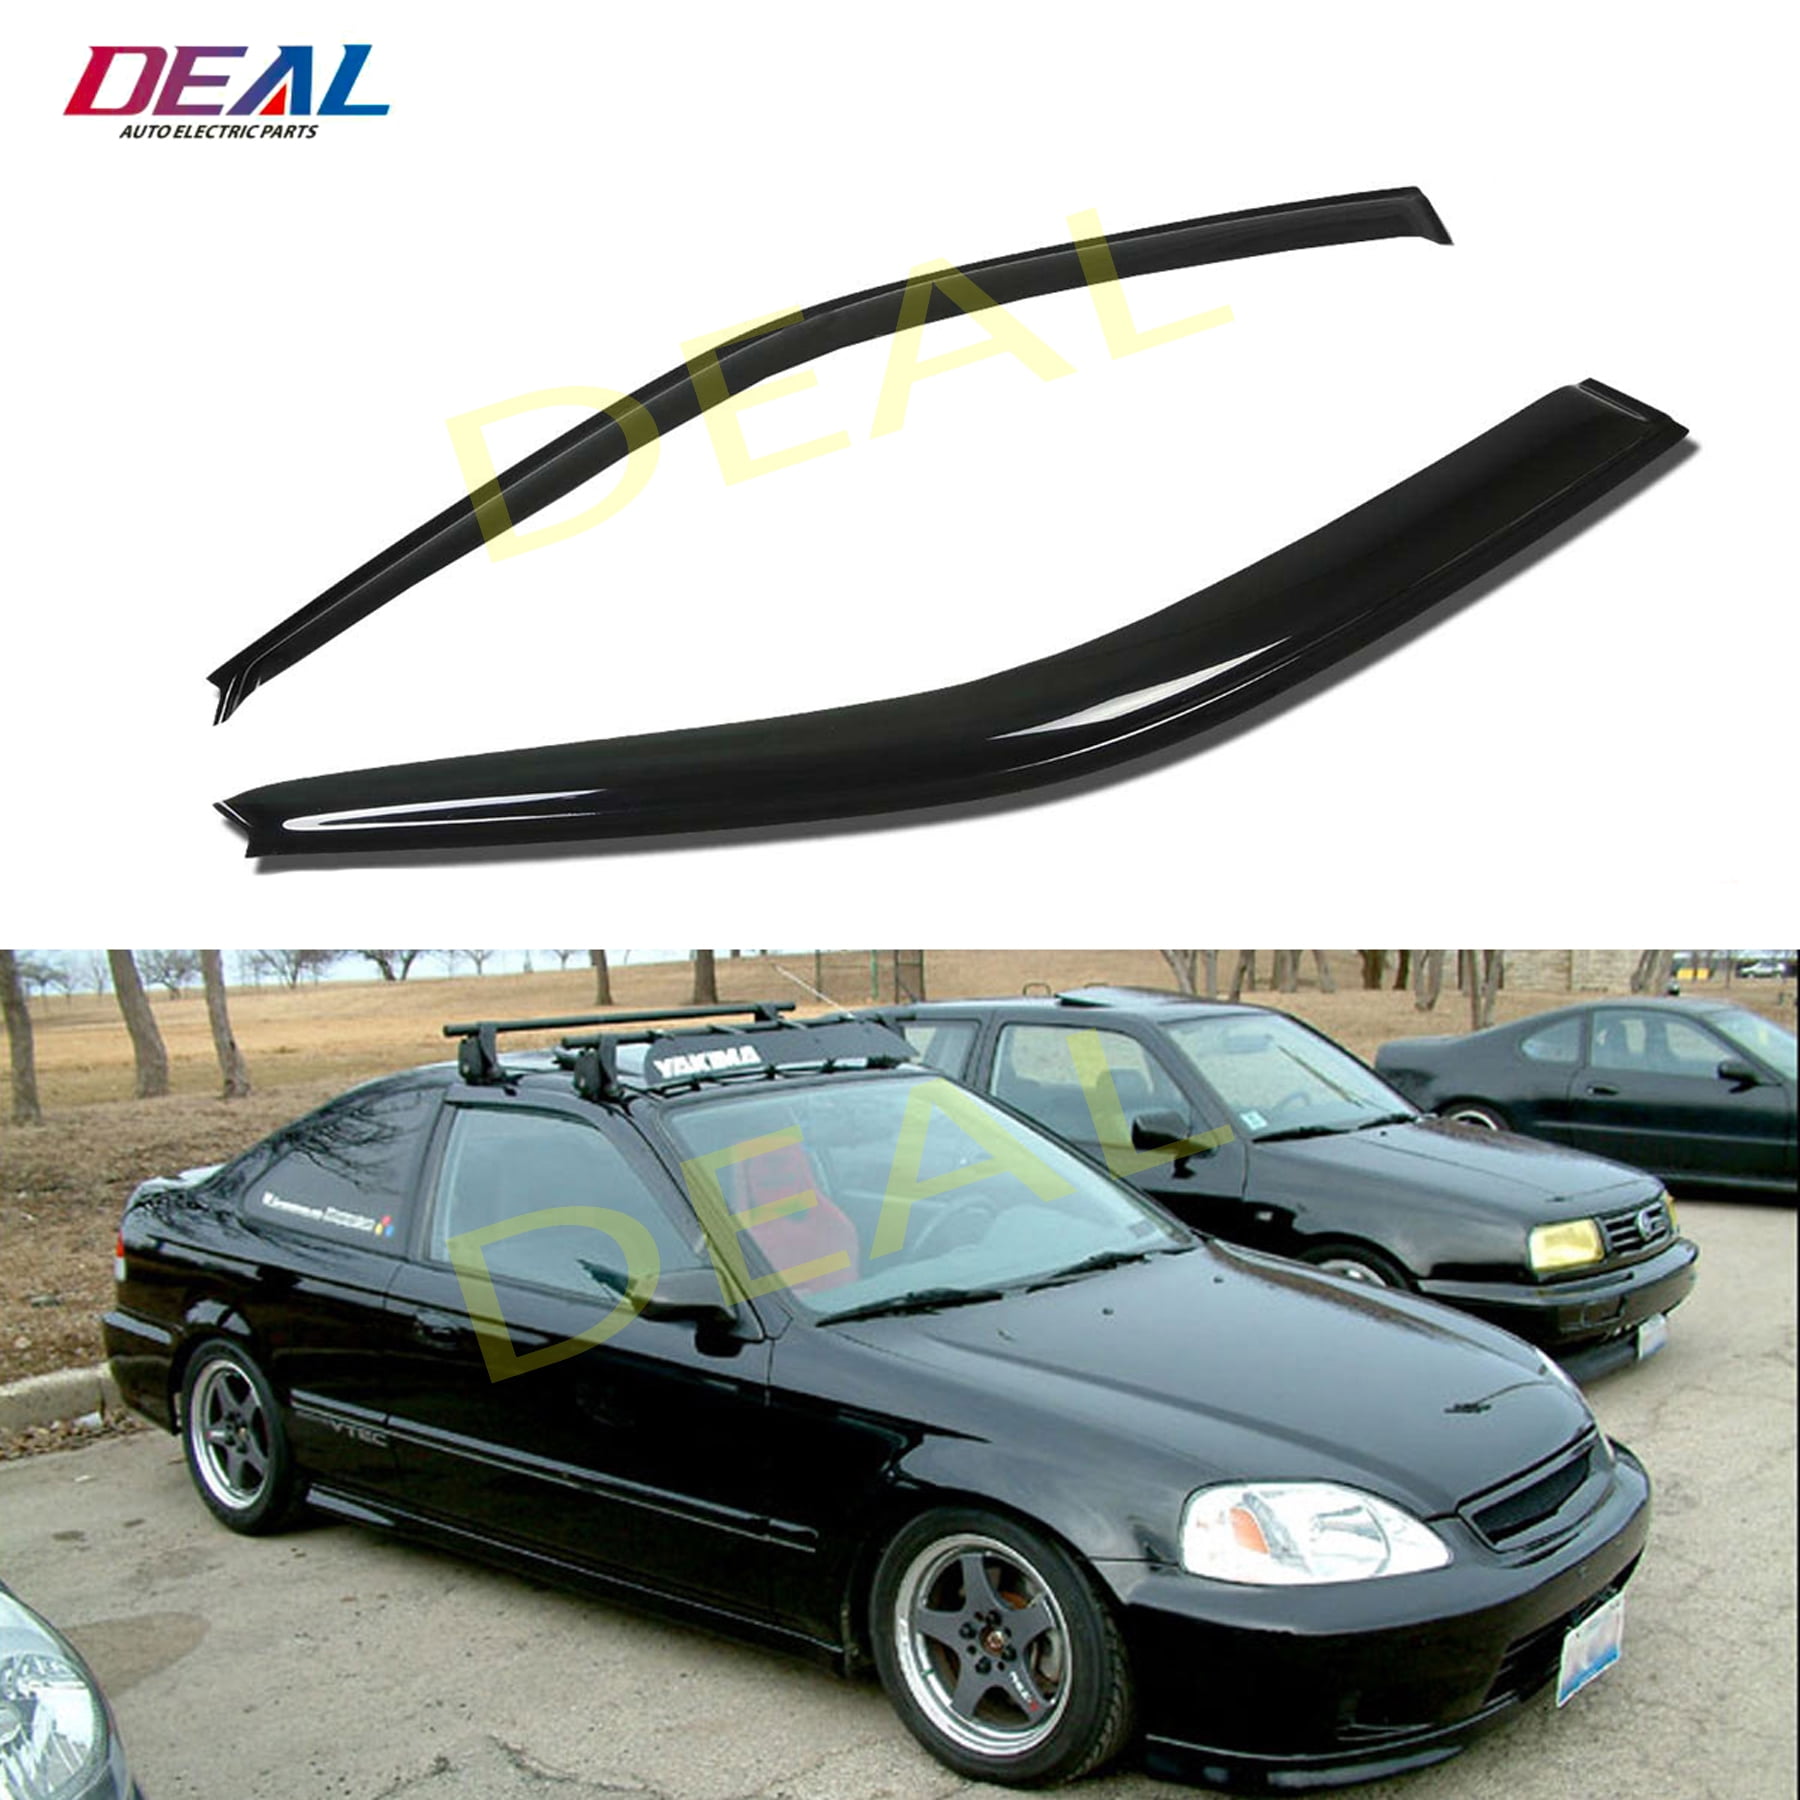 Custom Fit For 2006-2011 Honda Civic 2-Door Coupe Only DEAL 2-Piece Set JDM Style Vent Smoke Window Visor Side Window Sun Rain Guard With Outside Mount Tape-On Type